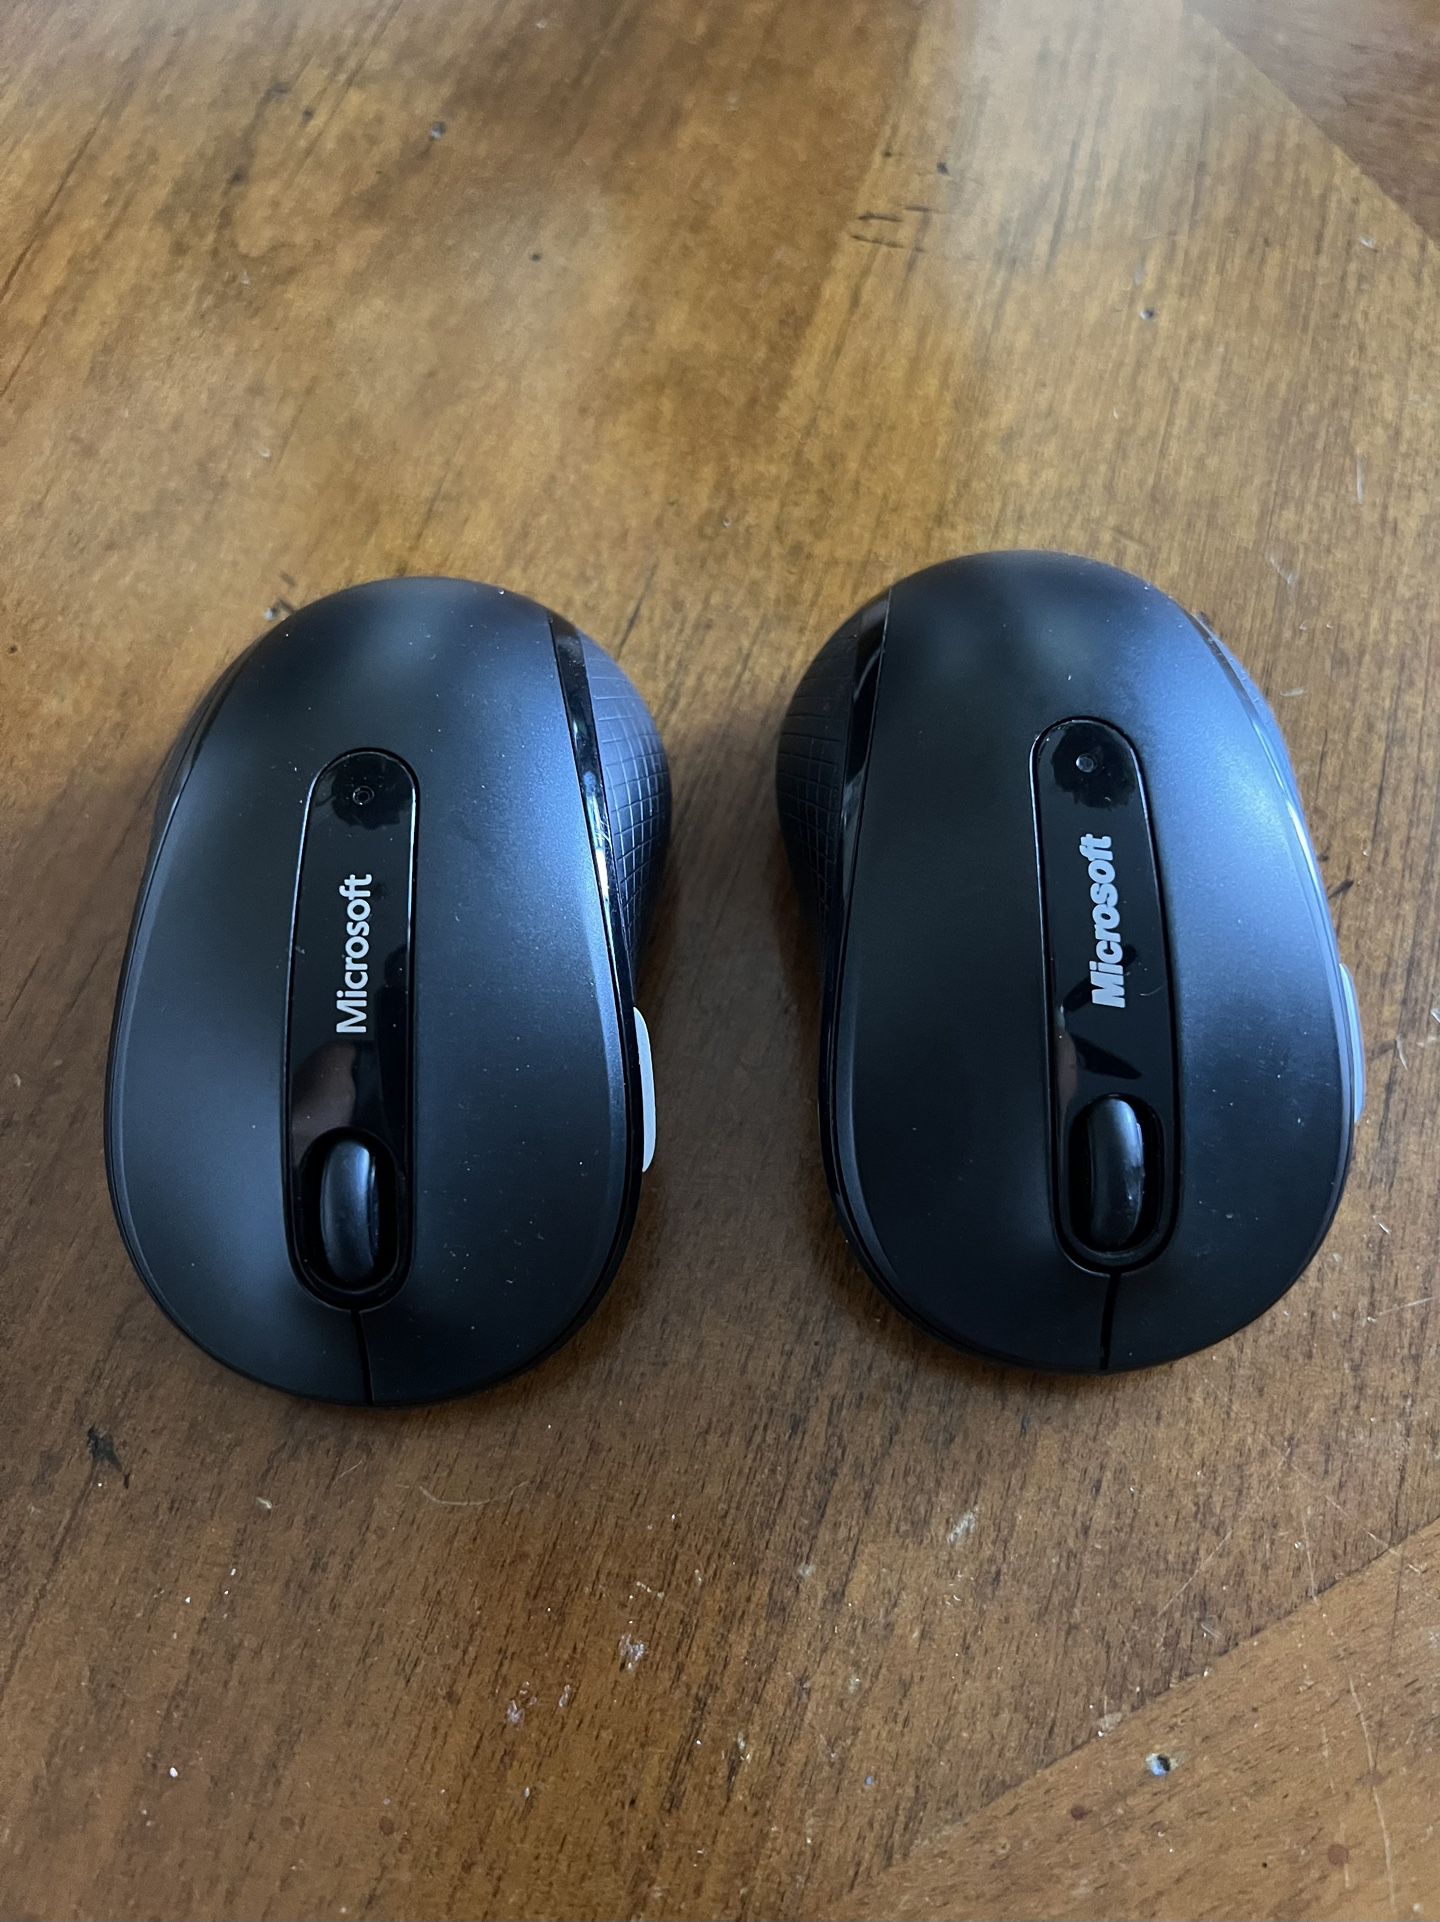 Microsoft ® Wireless Mobile Mouse 4000